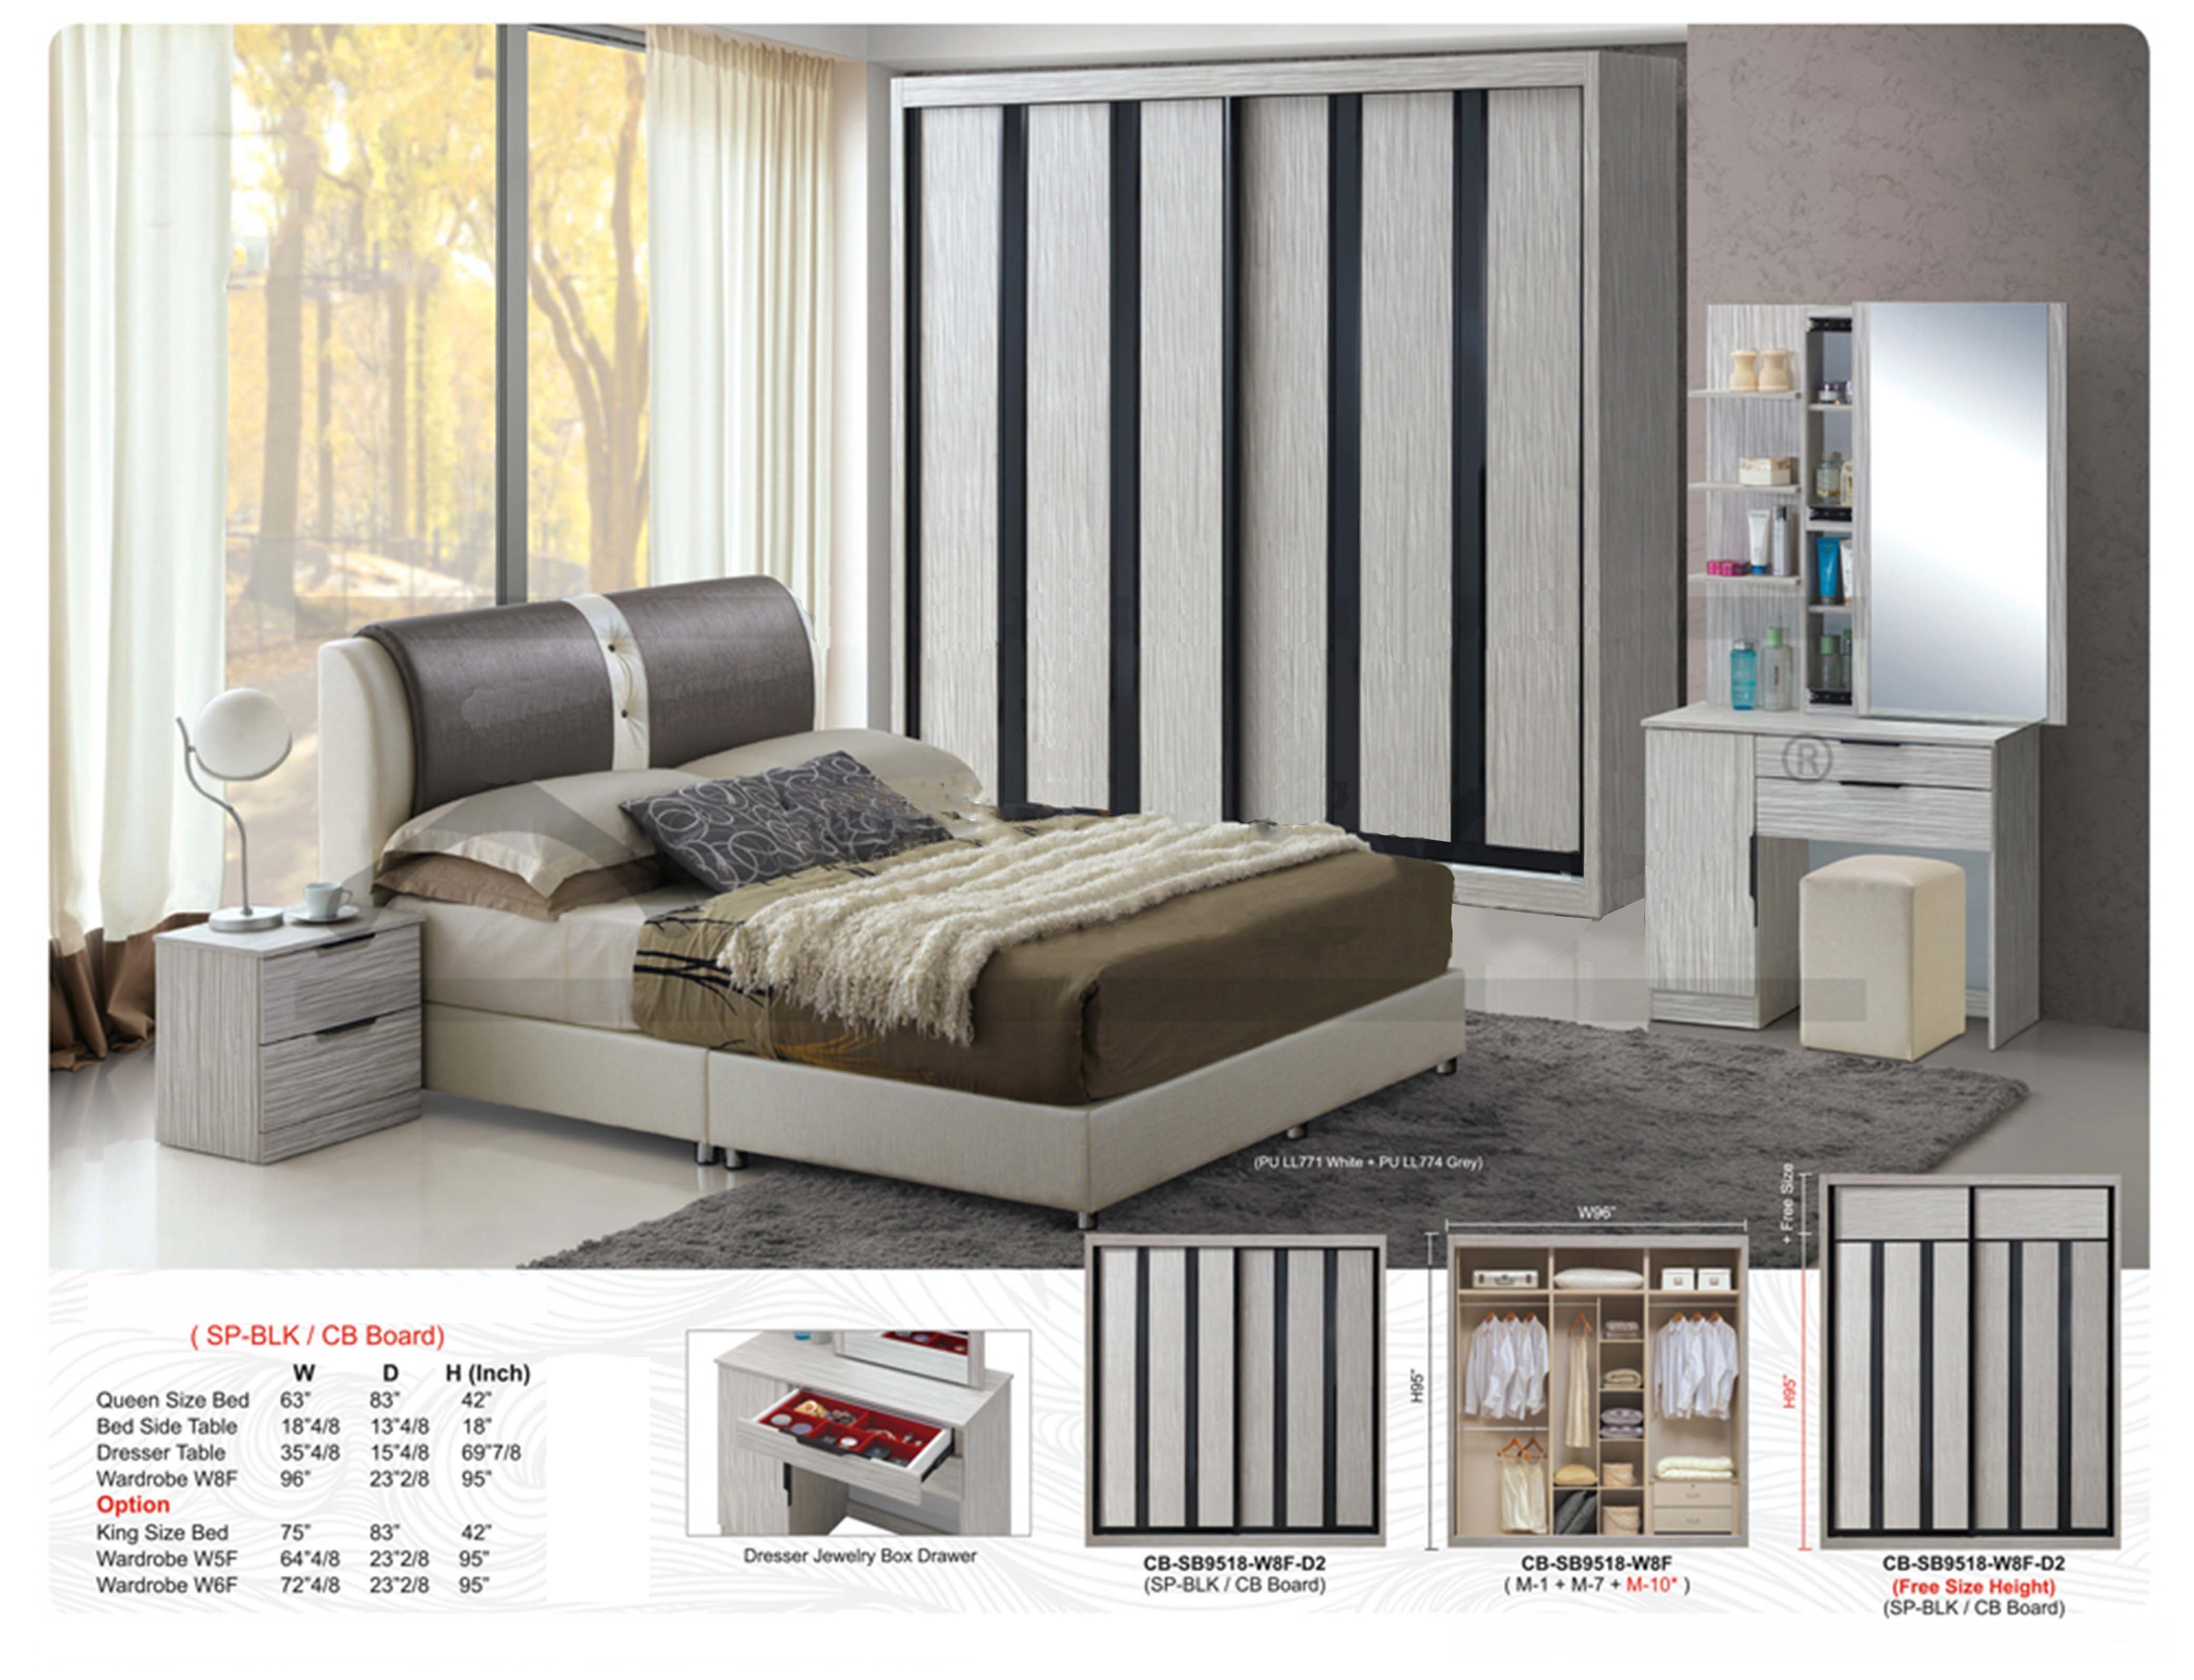 Mixbox Bedroom Set Cb Mh89, King Size Bed Frame And Dresser